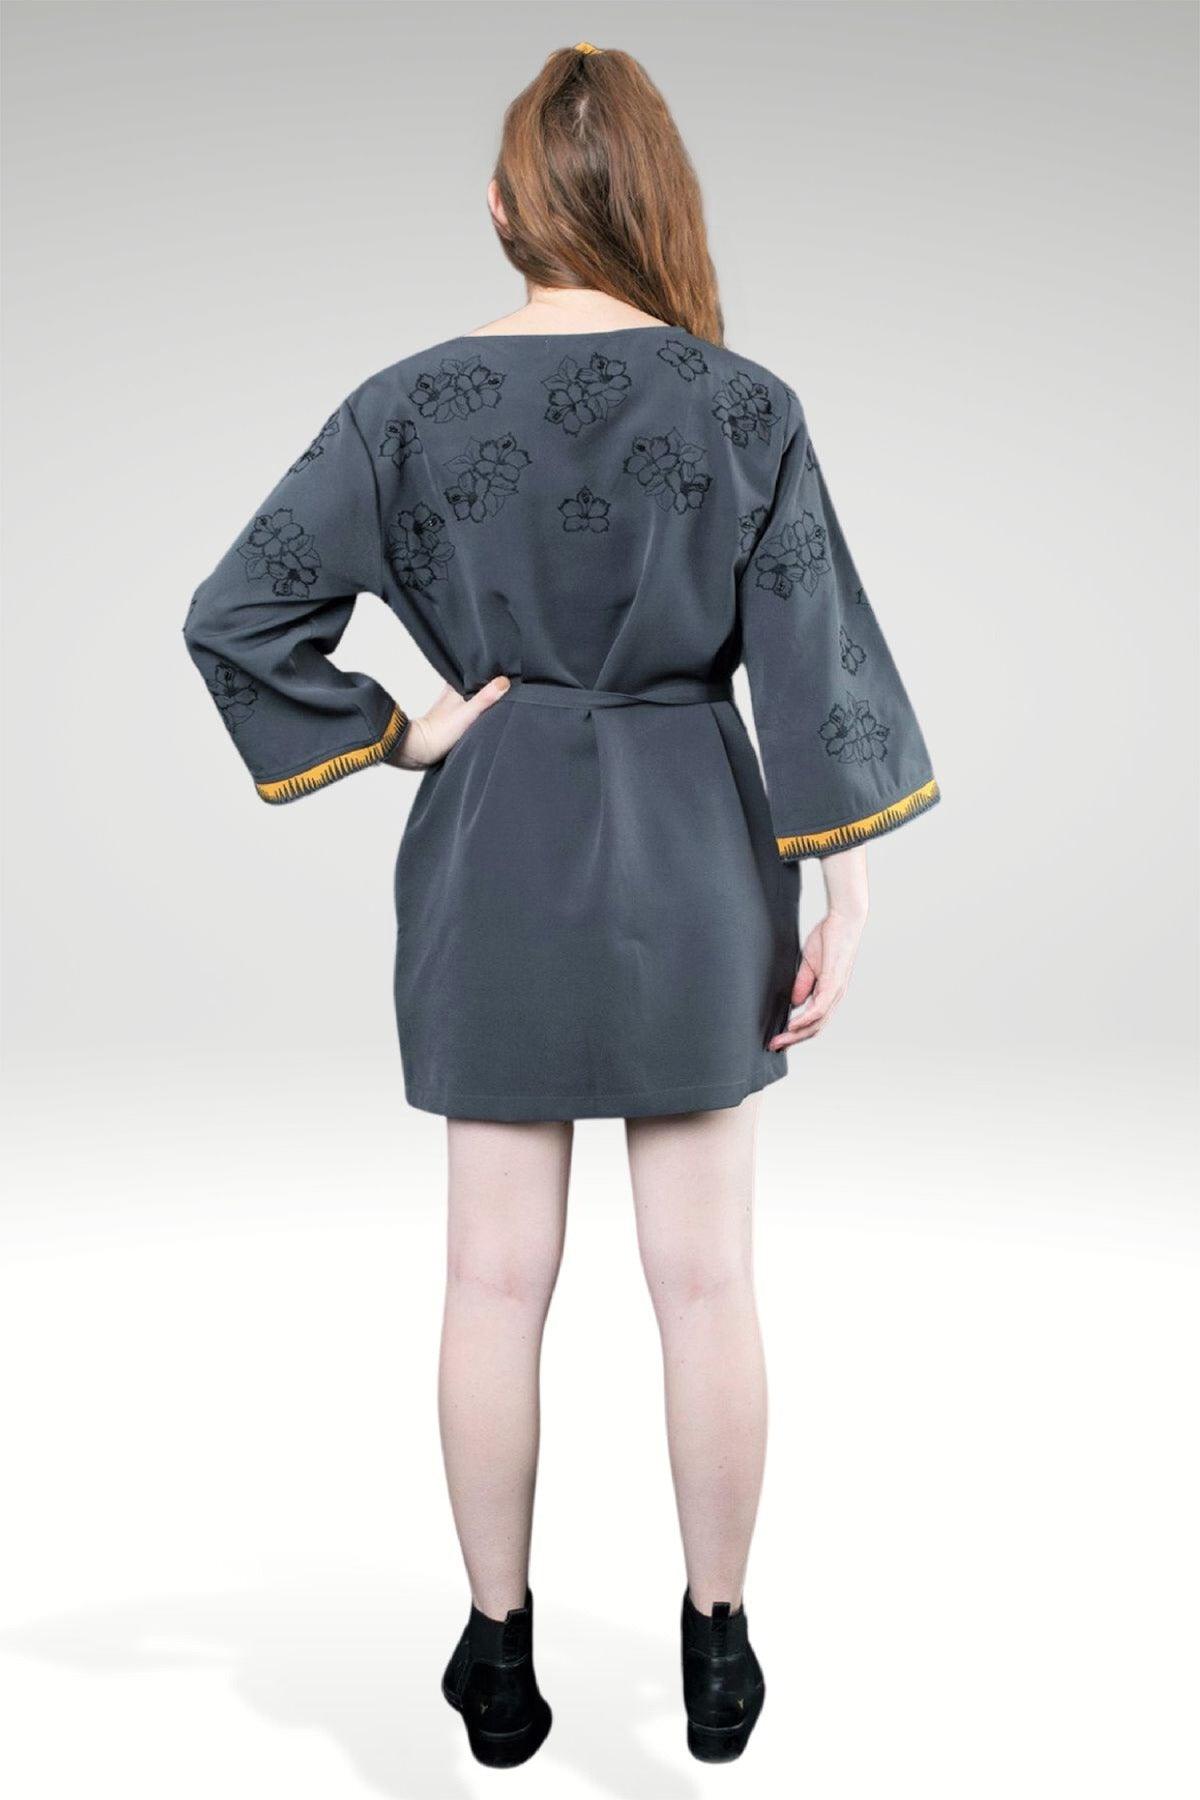 ABIGAIL FLORAL EMBROIDERED DRESS - zohaonline - Back view on the model- worn belted with boots